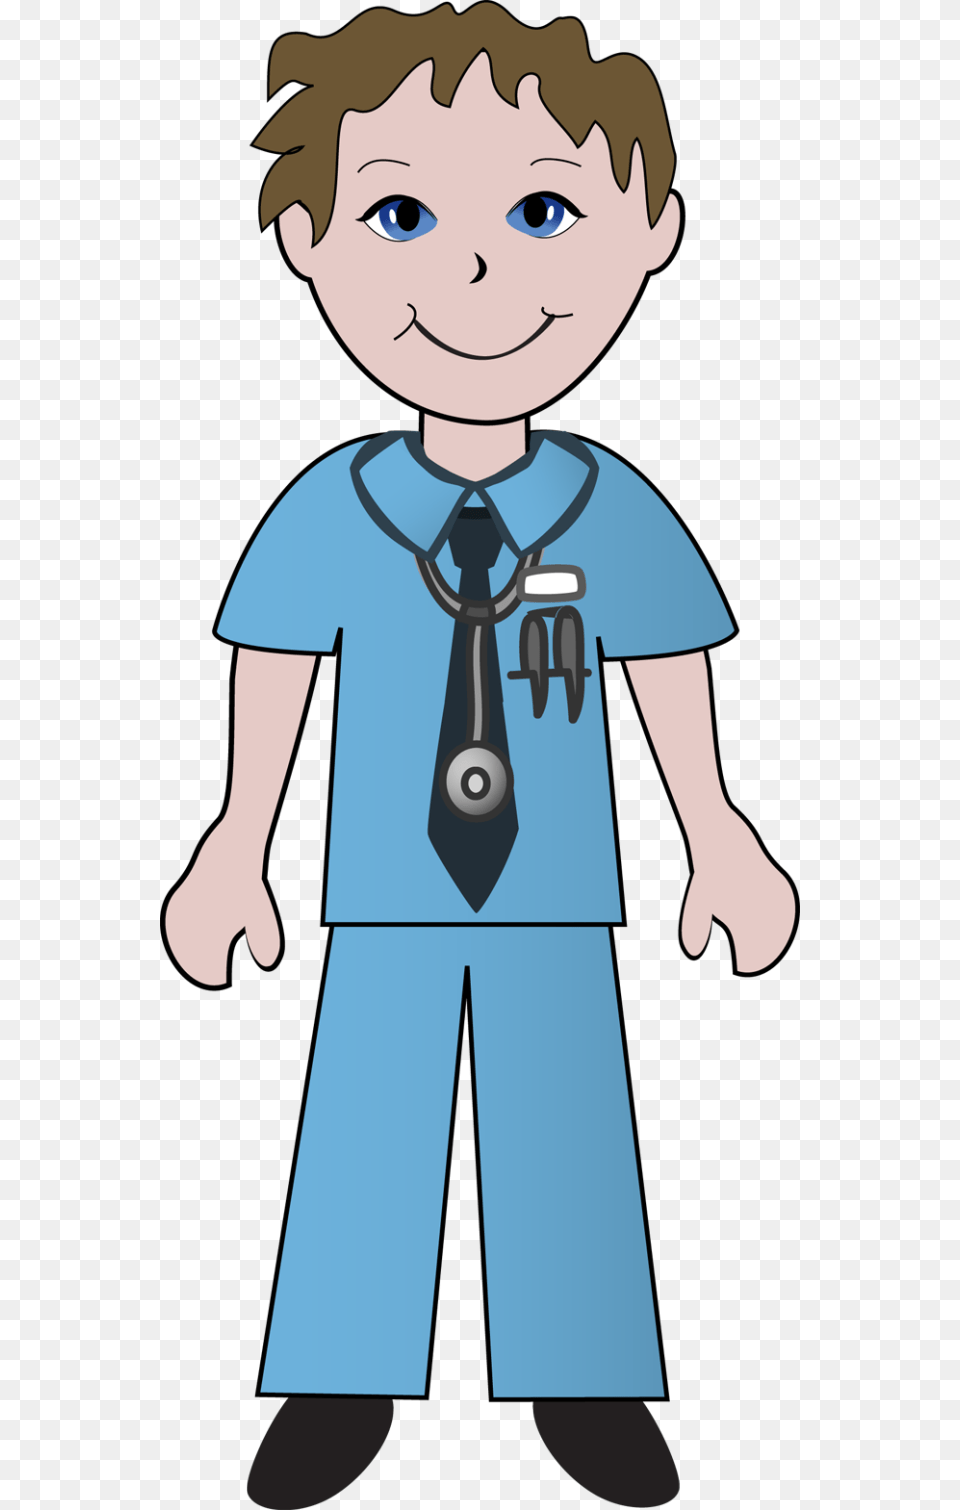 Nursing Nurse Clipart Clip Art Images Image 3 Nurse Boy And Girl Clipart, Accessories, Formal Wear, Tie, Baby Free Png Download